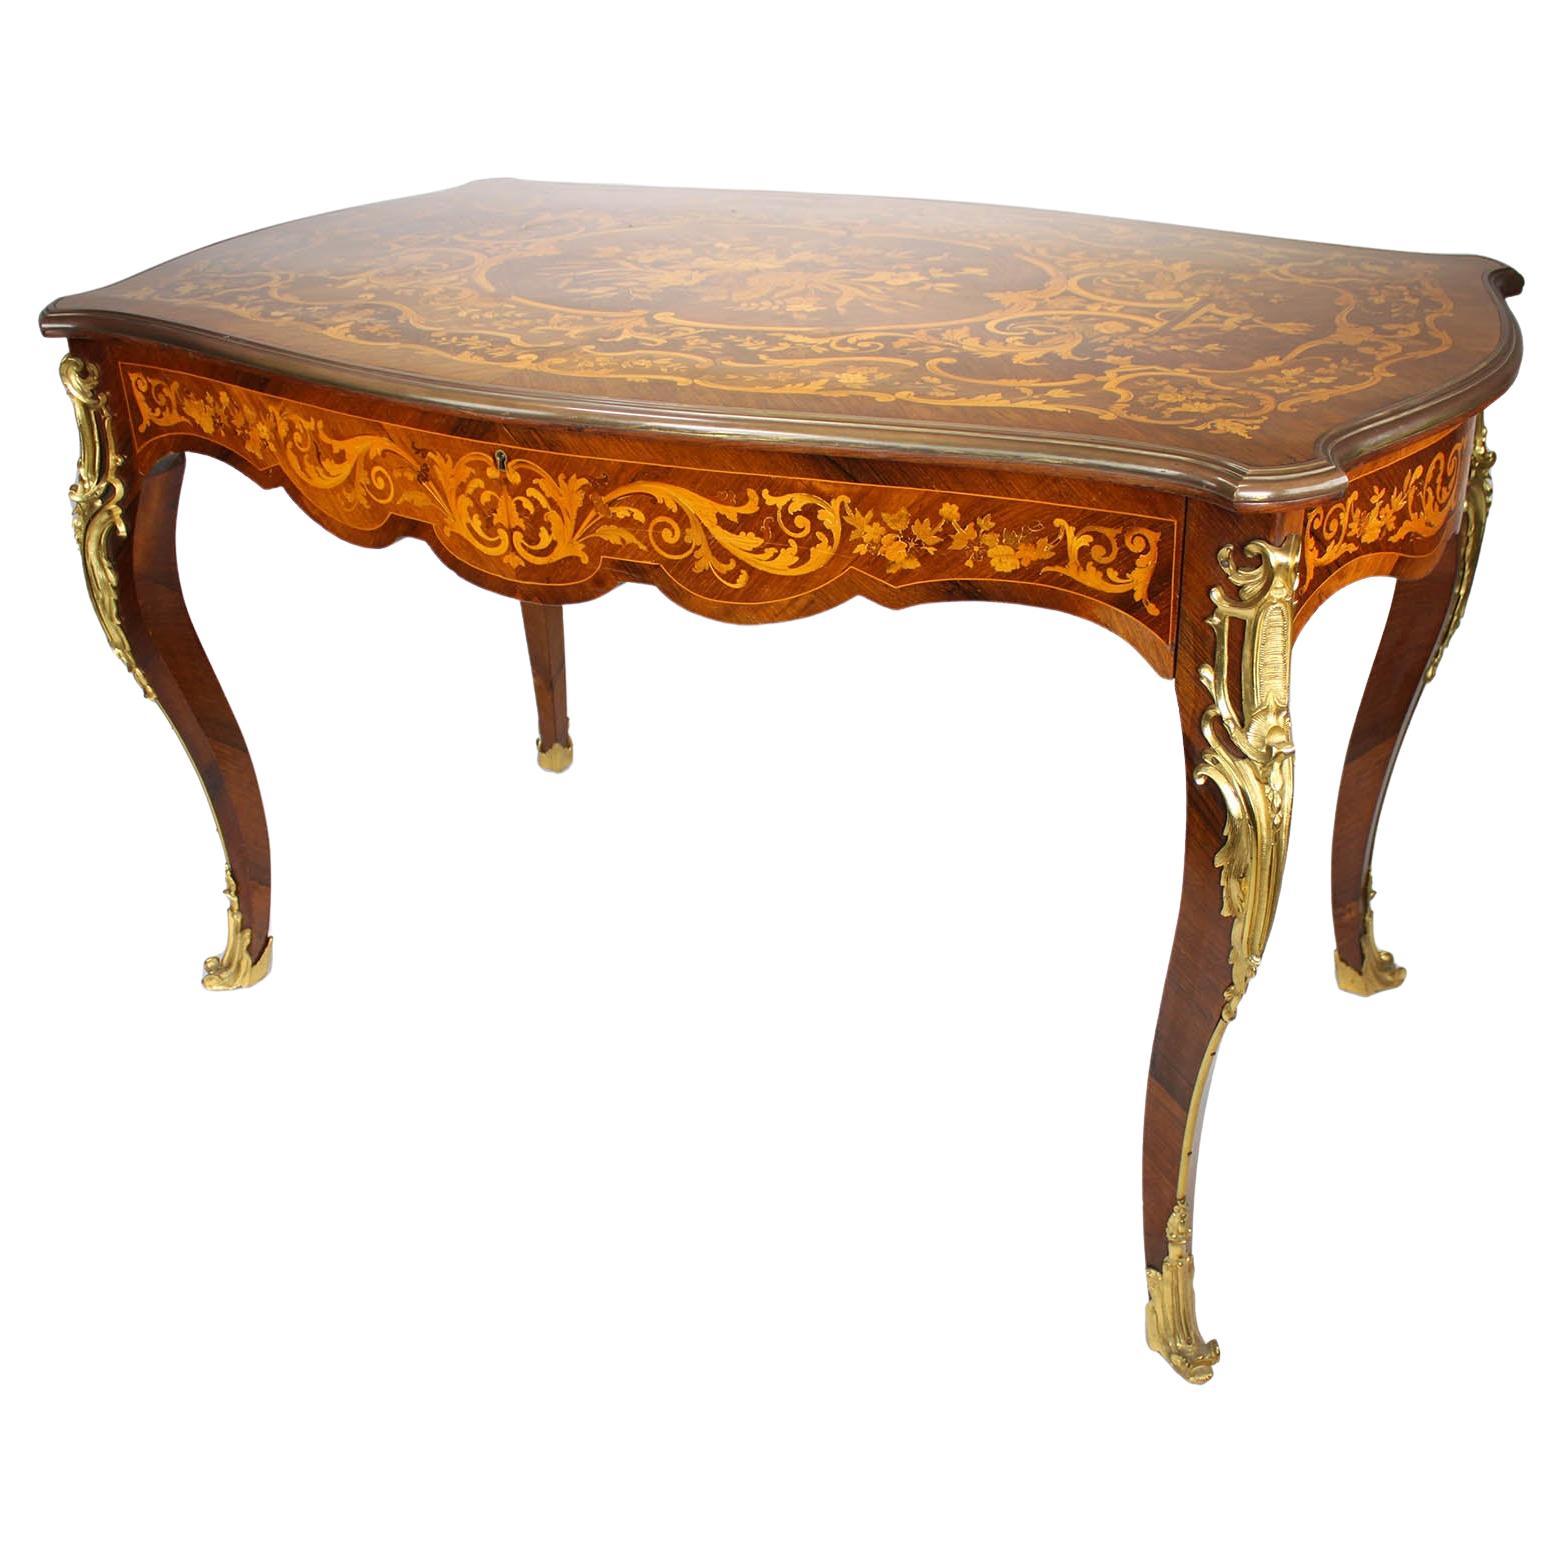 A French 19th/20th Century Louis XV Style Tulipwood Marquetry Writing Table/Desk For Sale